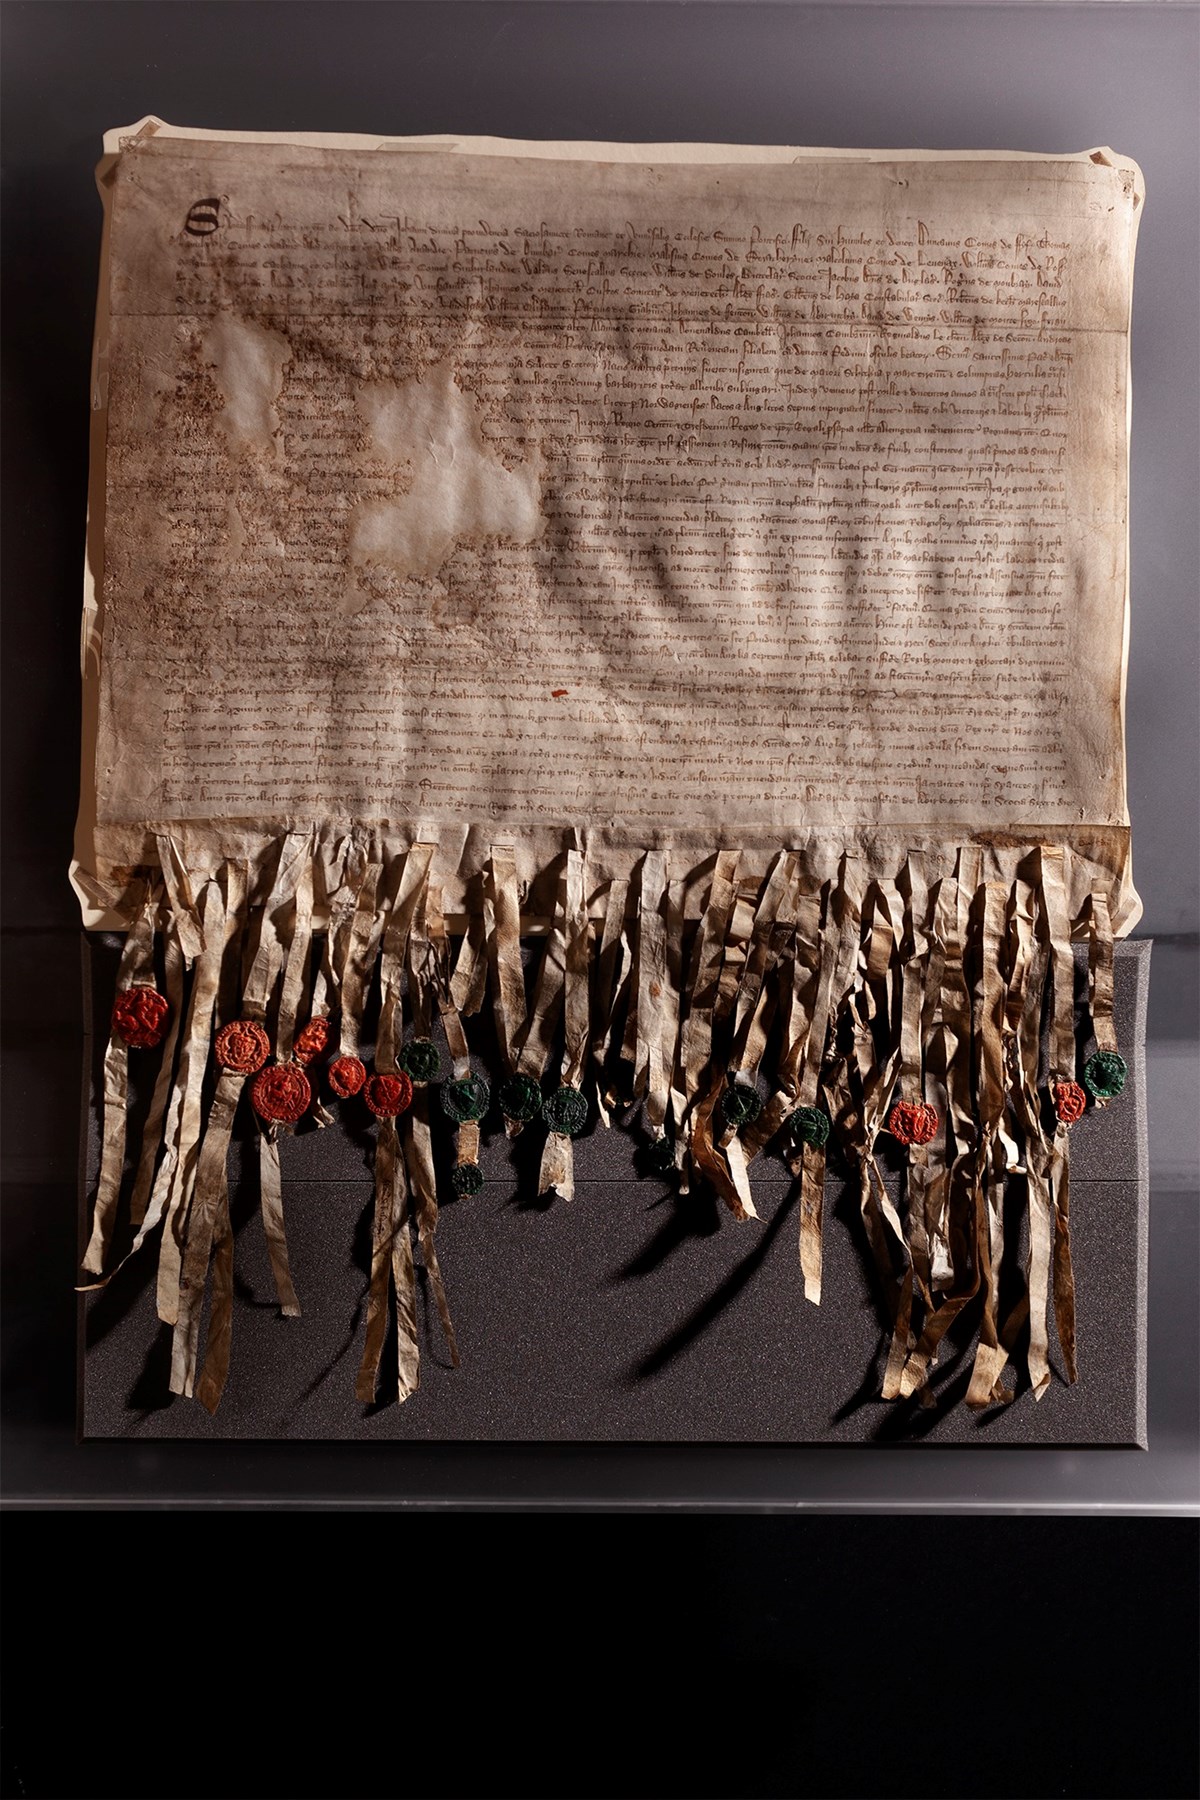 Declaration of Arbroath 3 credit Mike Brooks © King's Printer for Scotland, National Records of Scotland, SP13-7